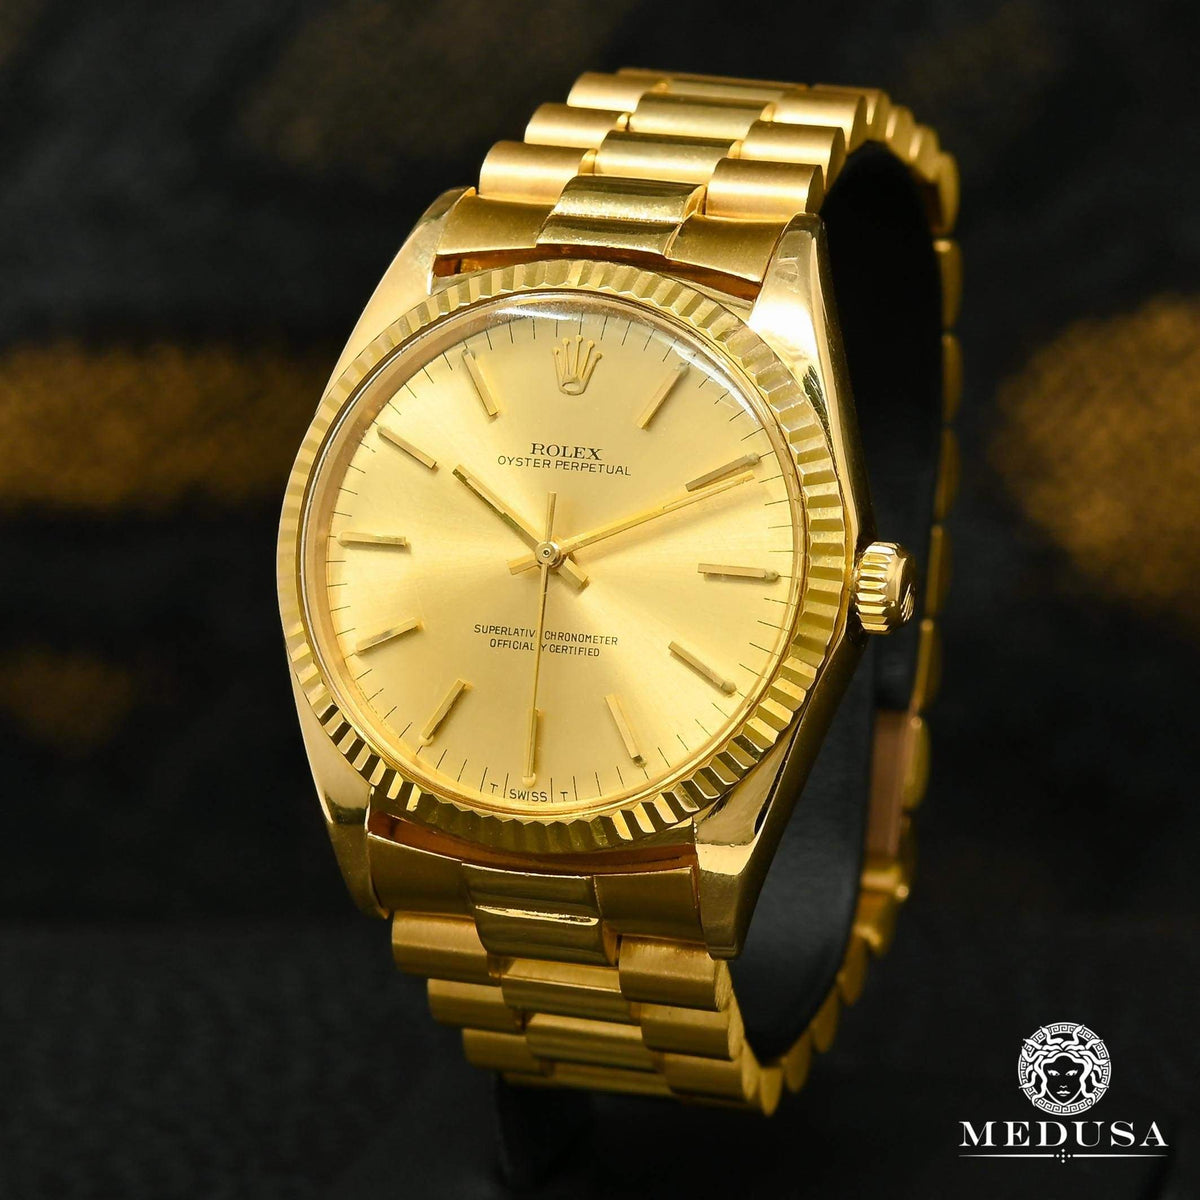 Montre Rolex | Montre Homme Rolex Oyster Perpetual 36mm - Champagne Or 18K / Or Jaune